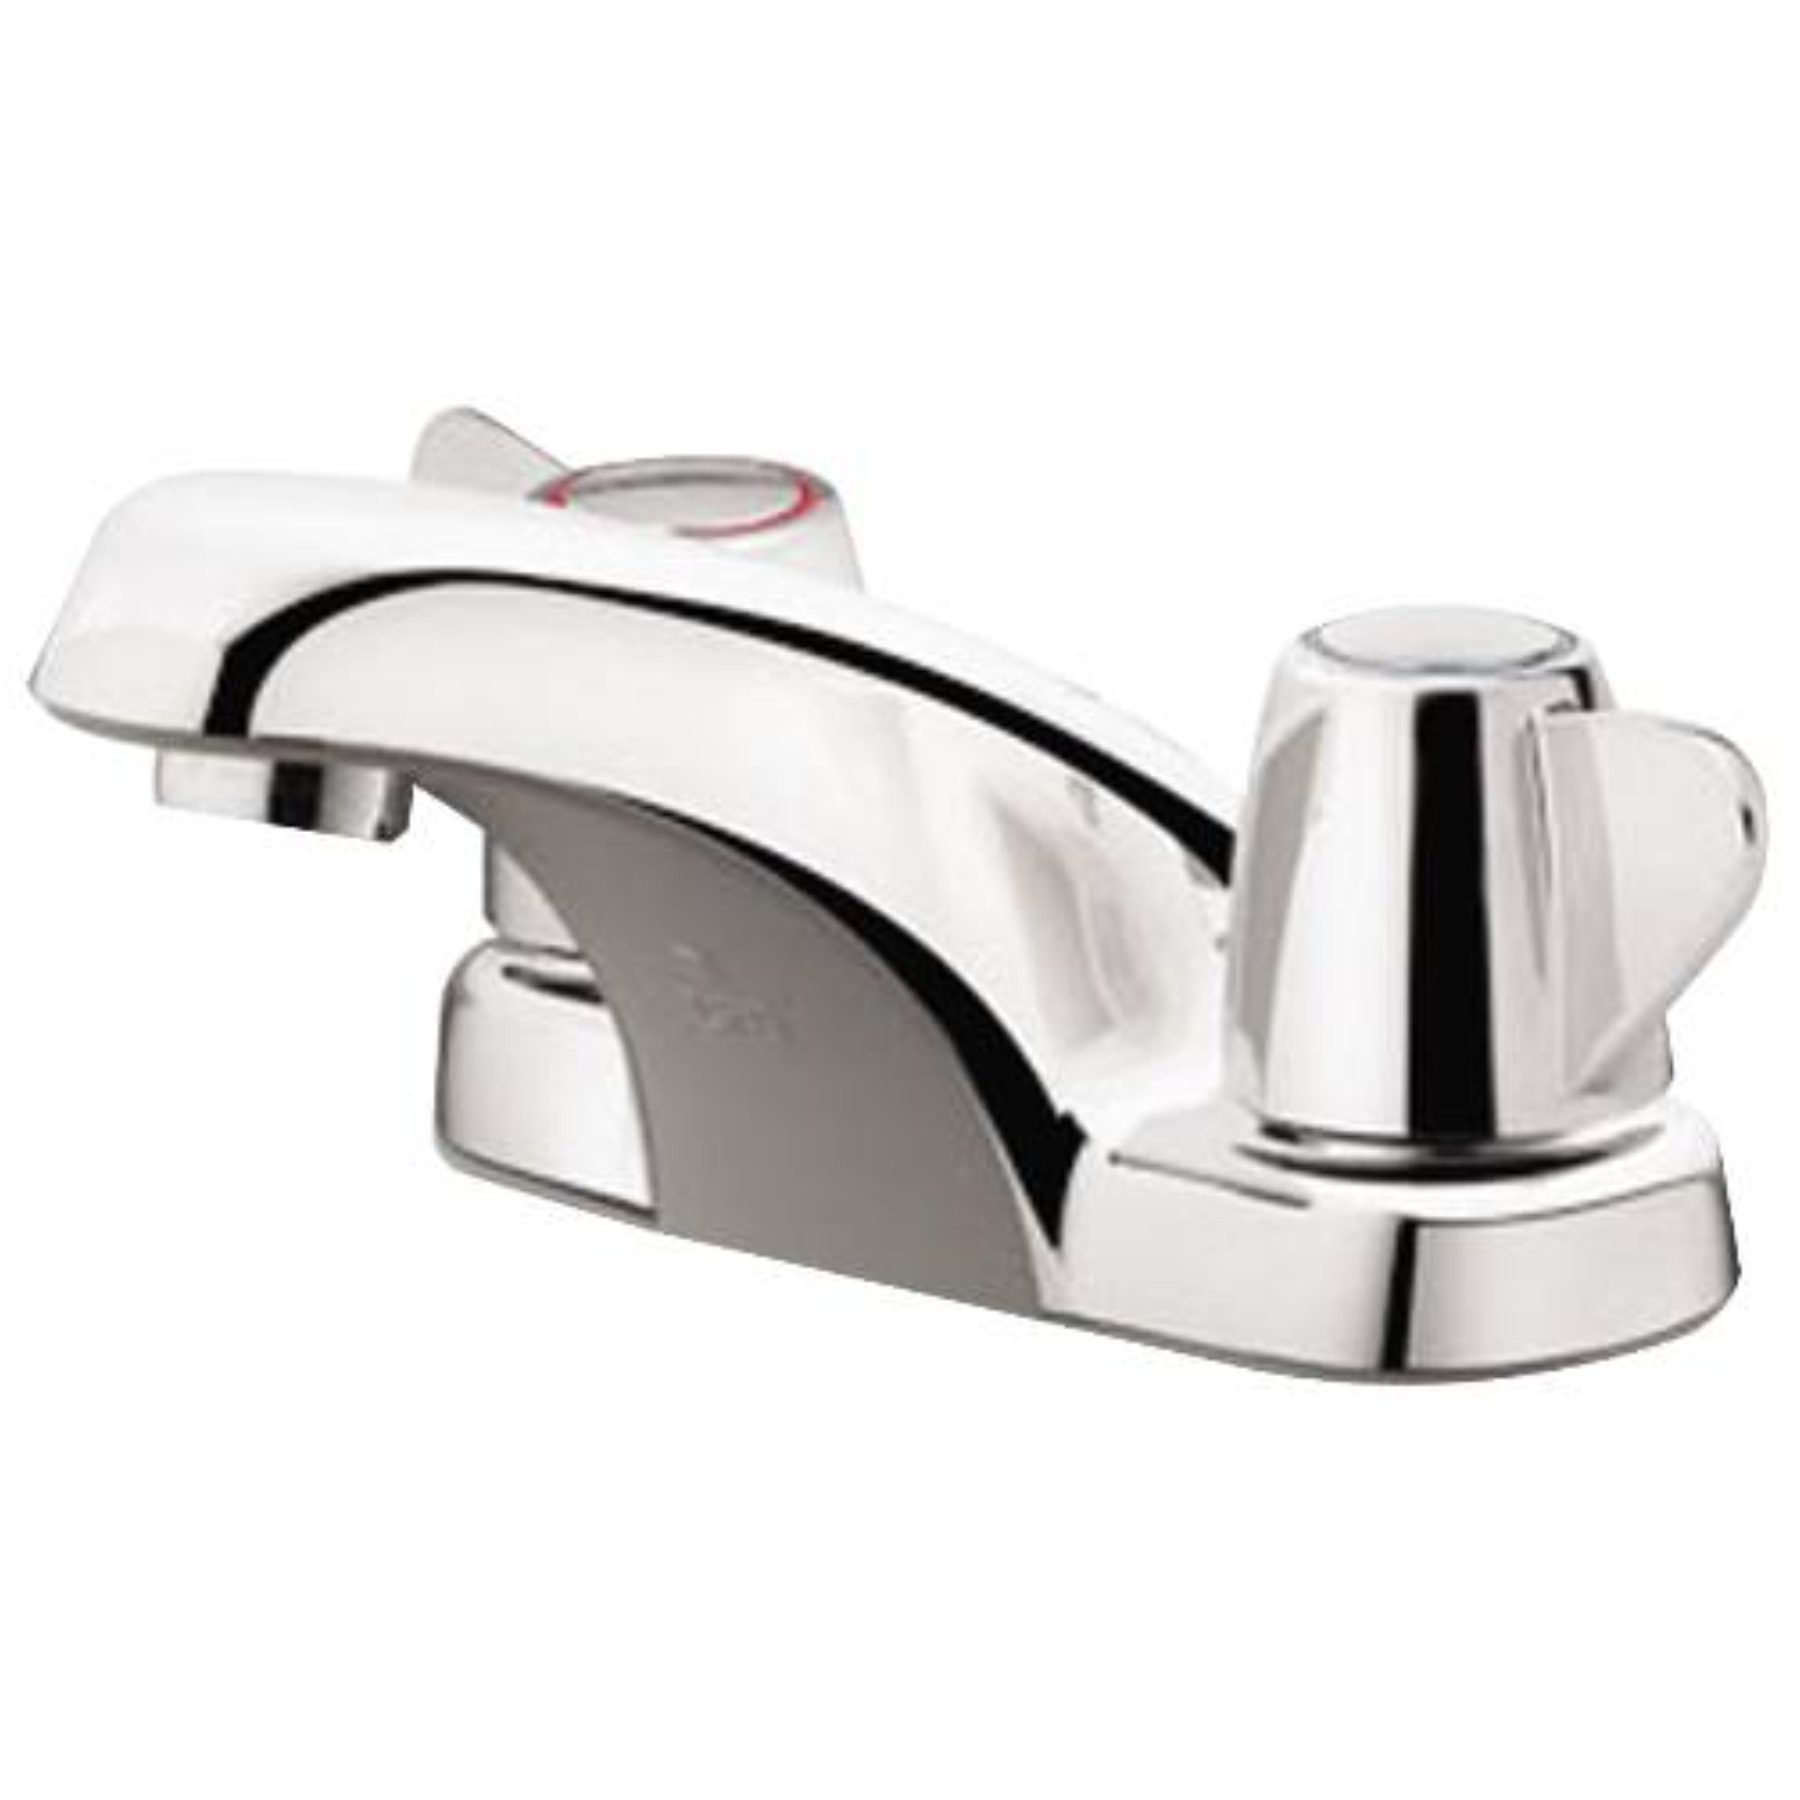 CFG CORNERSTONE� BATHROOM FAUCET, TWO HANDLE, WITH 50/50 WASTE, CHROME, LEAD FREE, 1.2 GPM